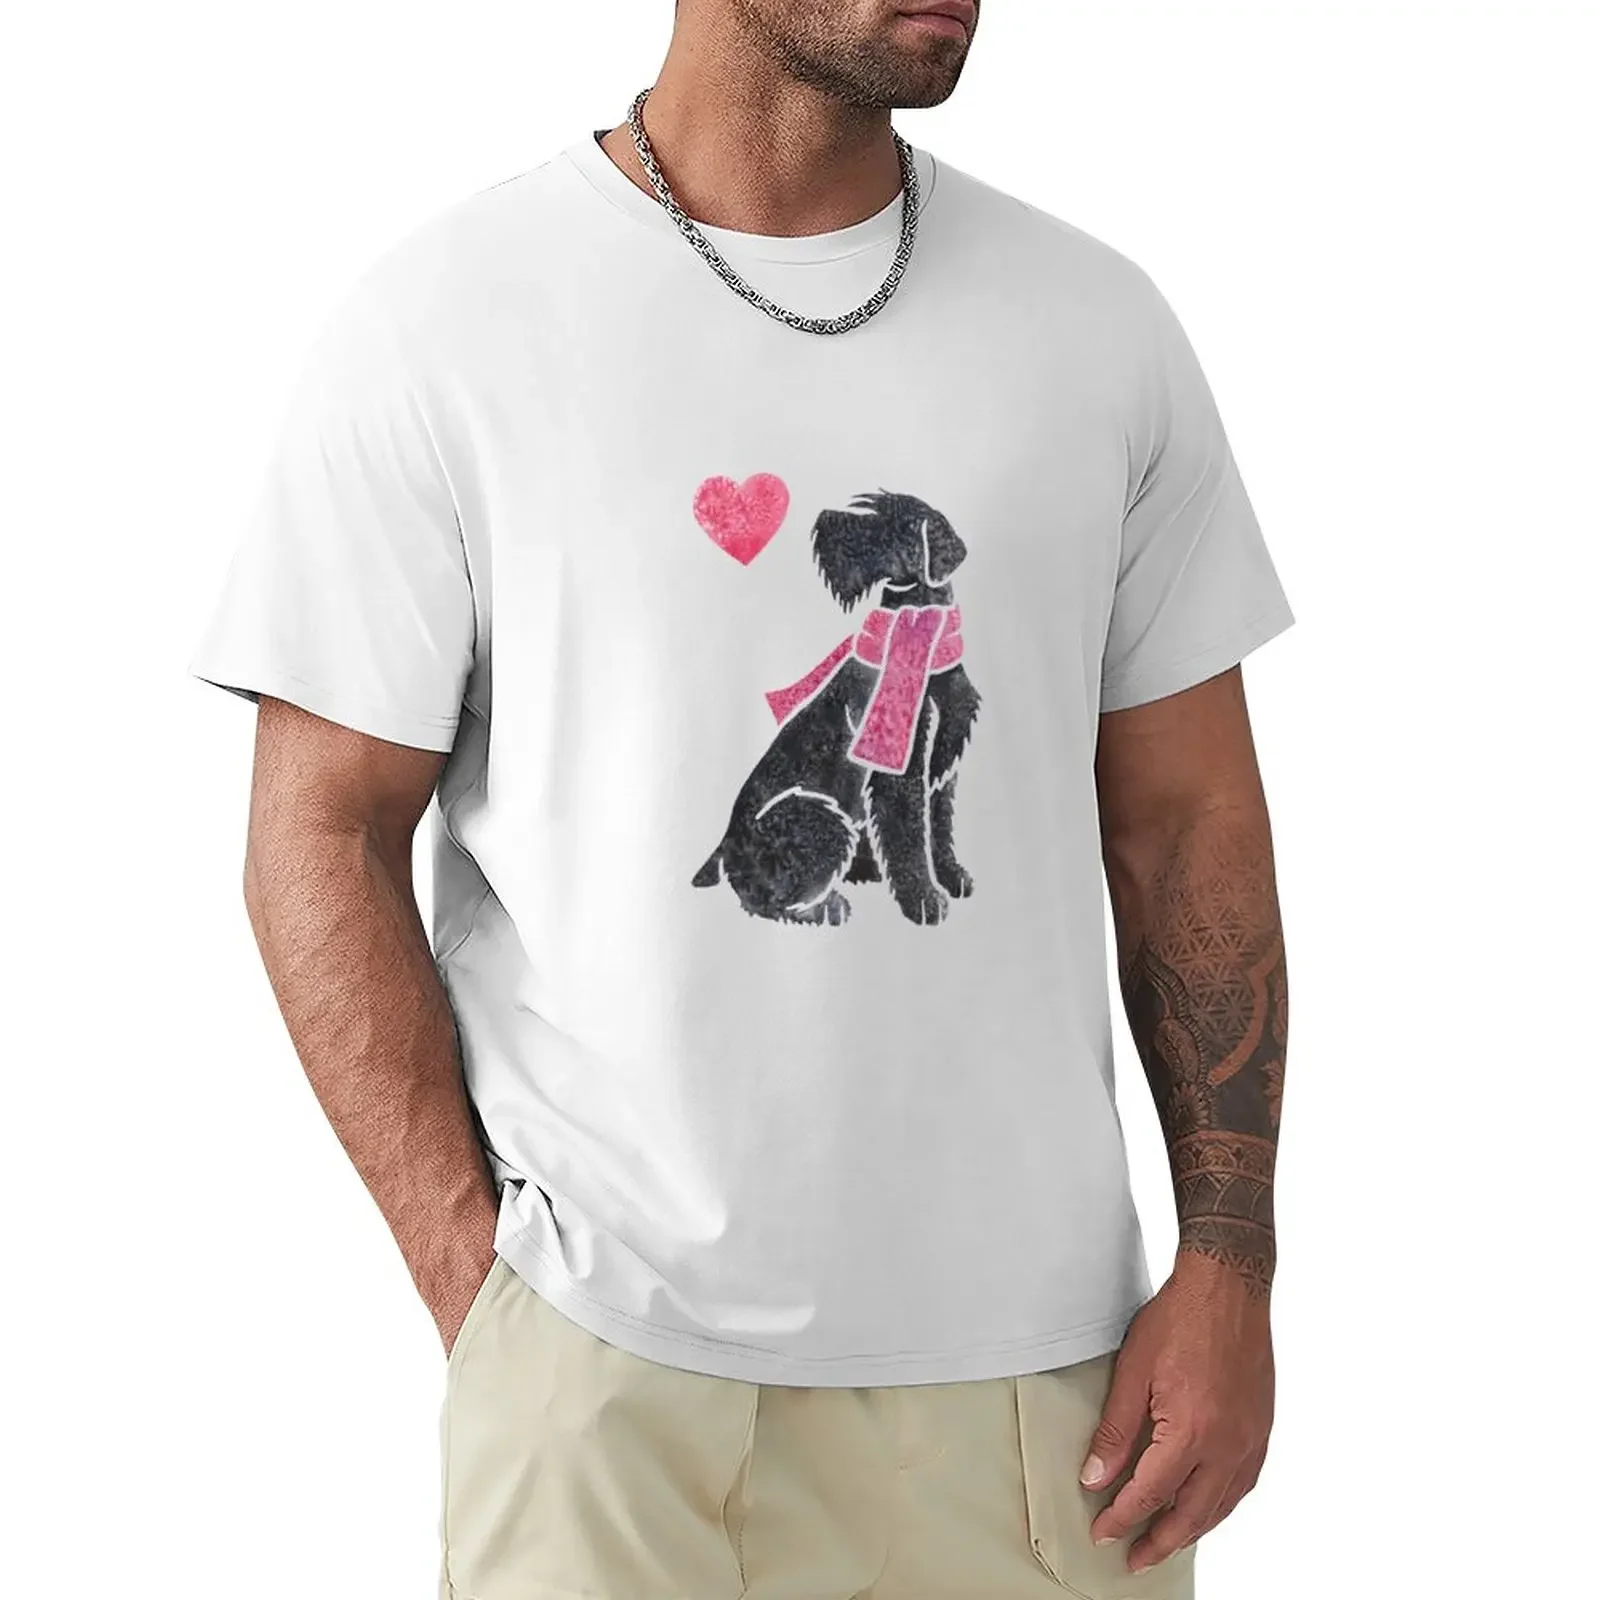 Watercolour Giant Schnauzer T-Shirt vintage anime mens white t shirts anime customs tops aesthetic clothes mens clothing kyku anime tshirt men anime t shirt hip hop tee 3d print t shirt mens clothing funny t shirts 2018 new summer hipster tops